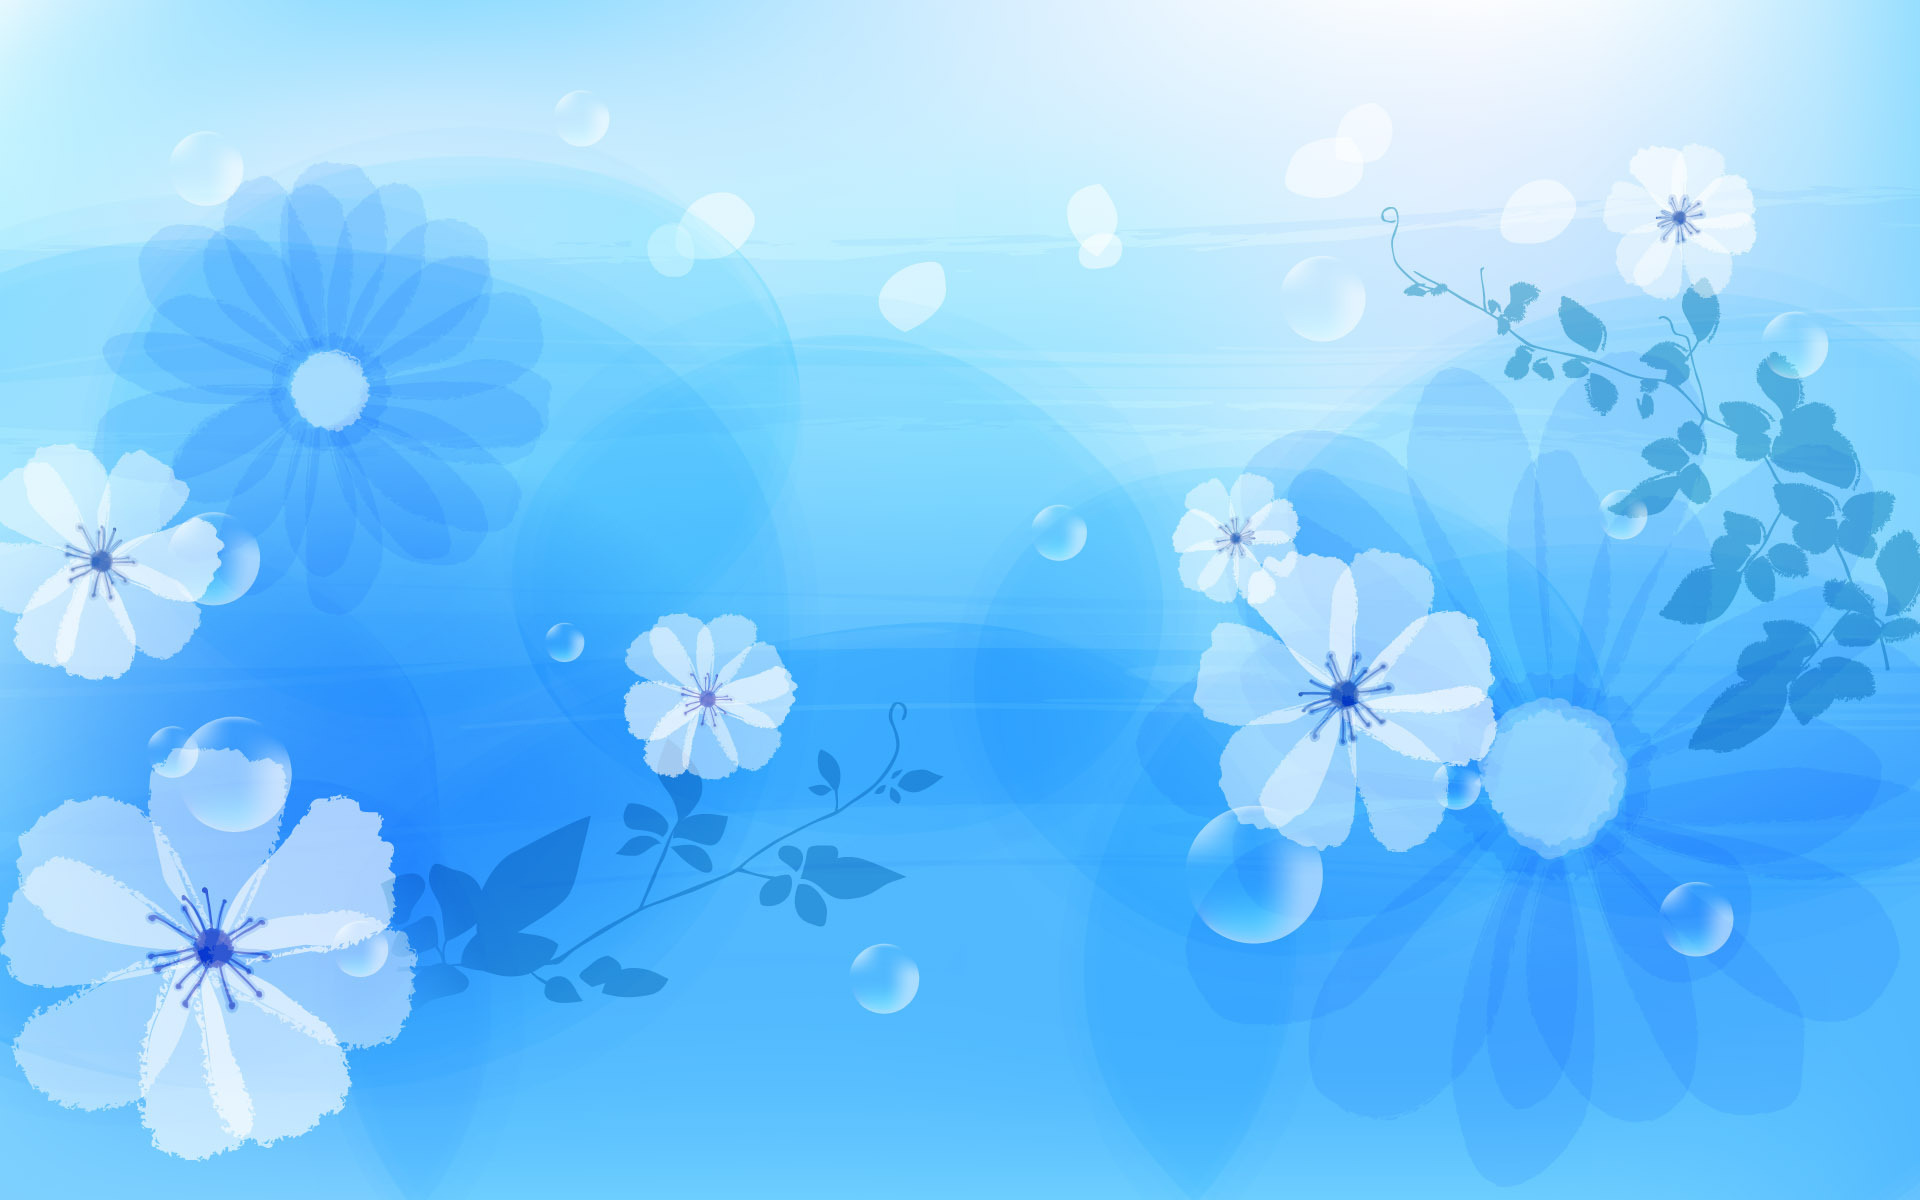 Blue Flowers Backgrounds Related Keywords amp Suggestions